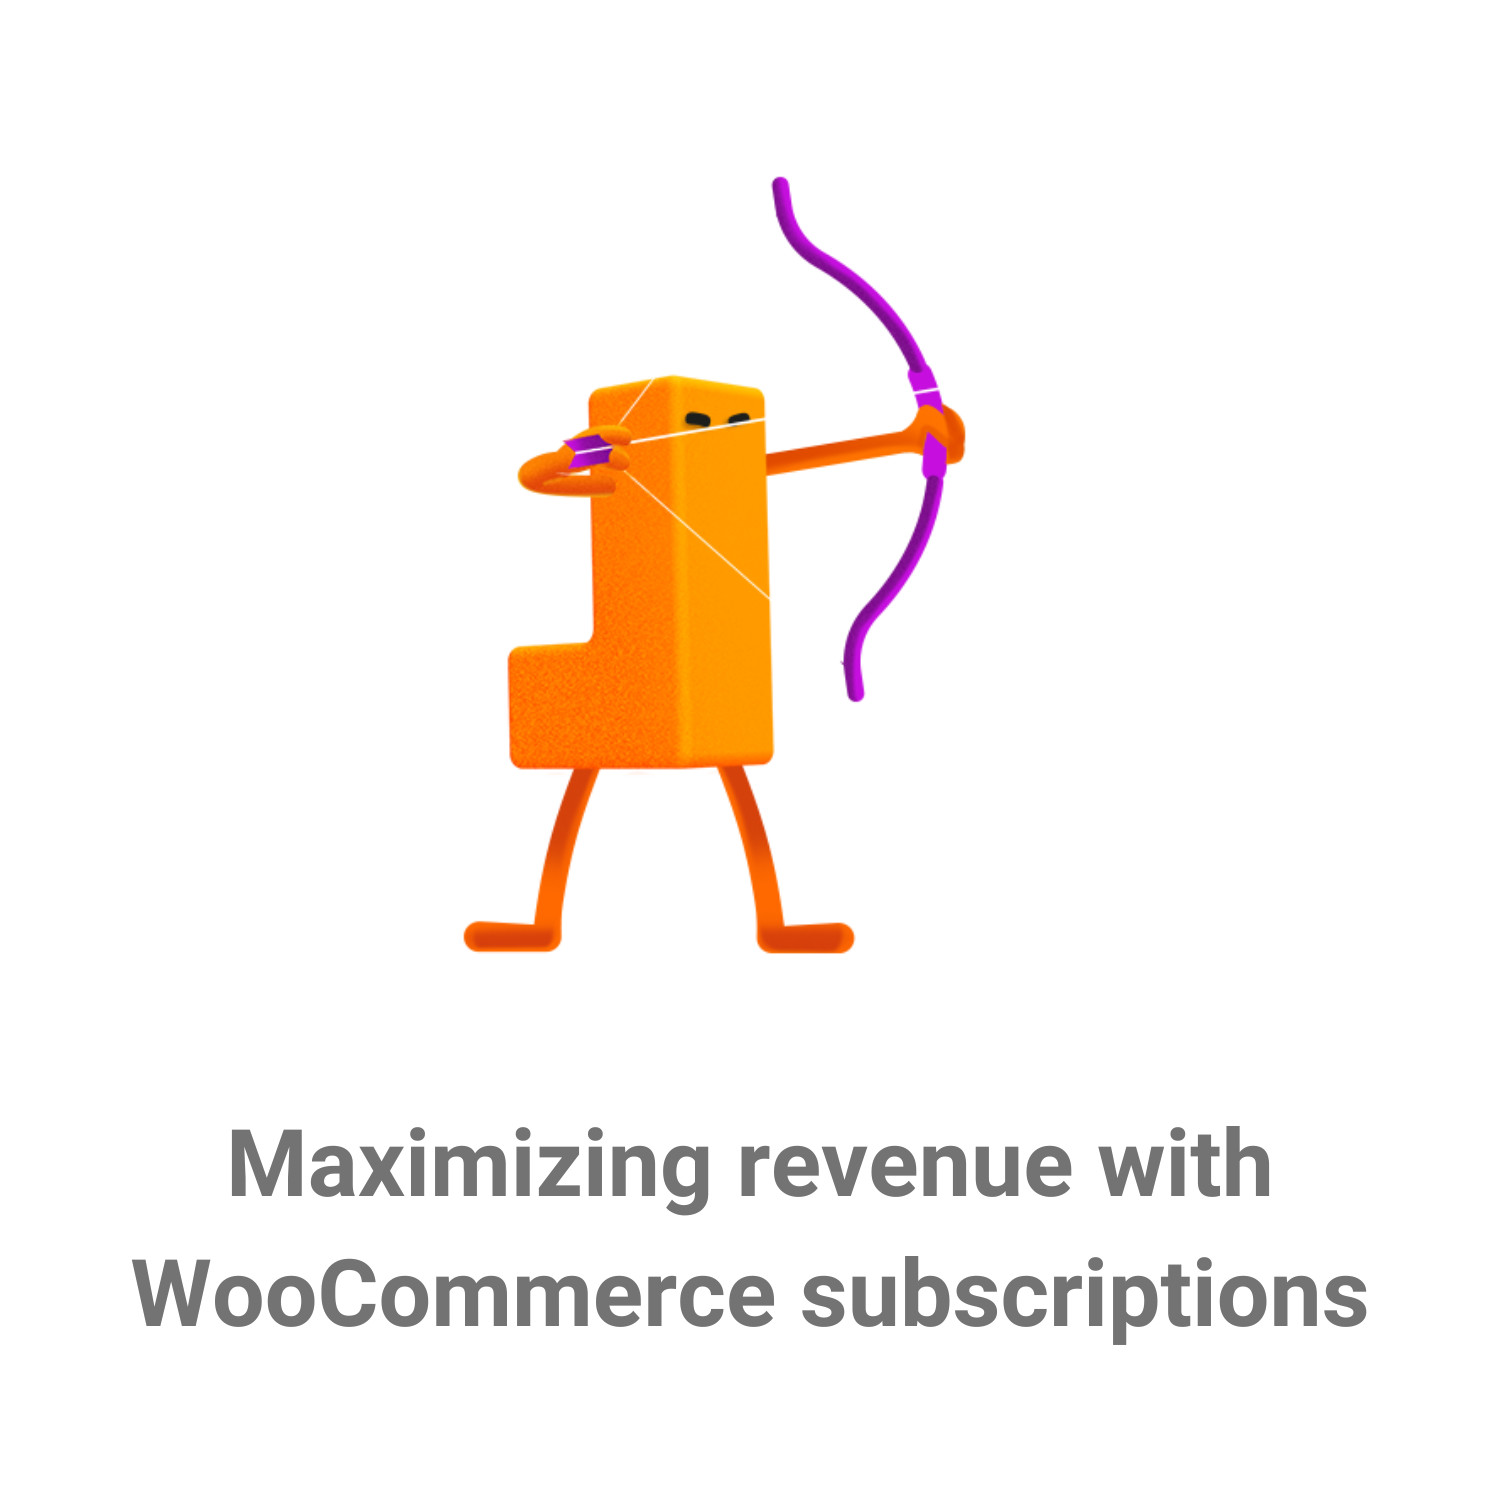 Maximizing revenue with WooCommerce subscriptions